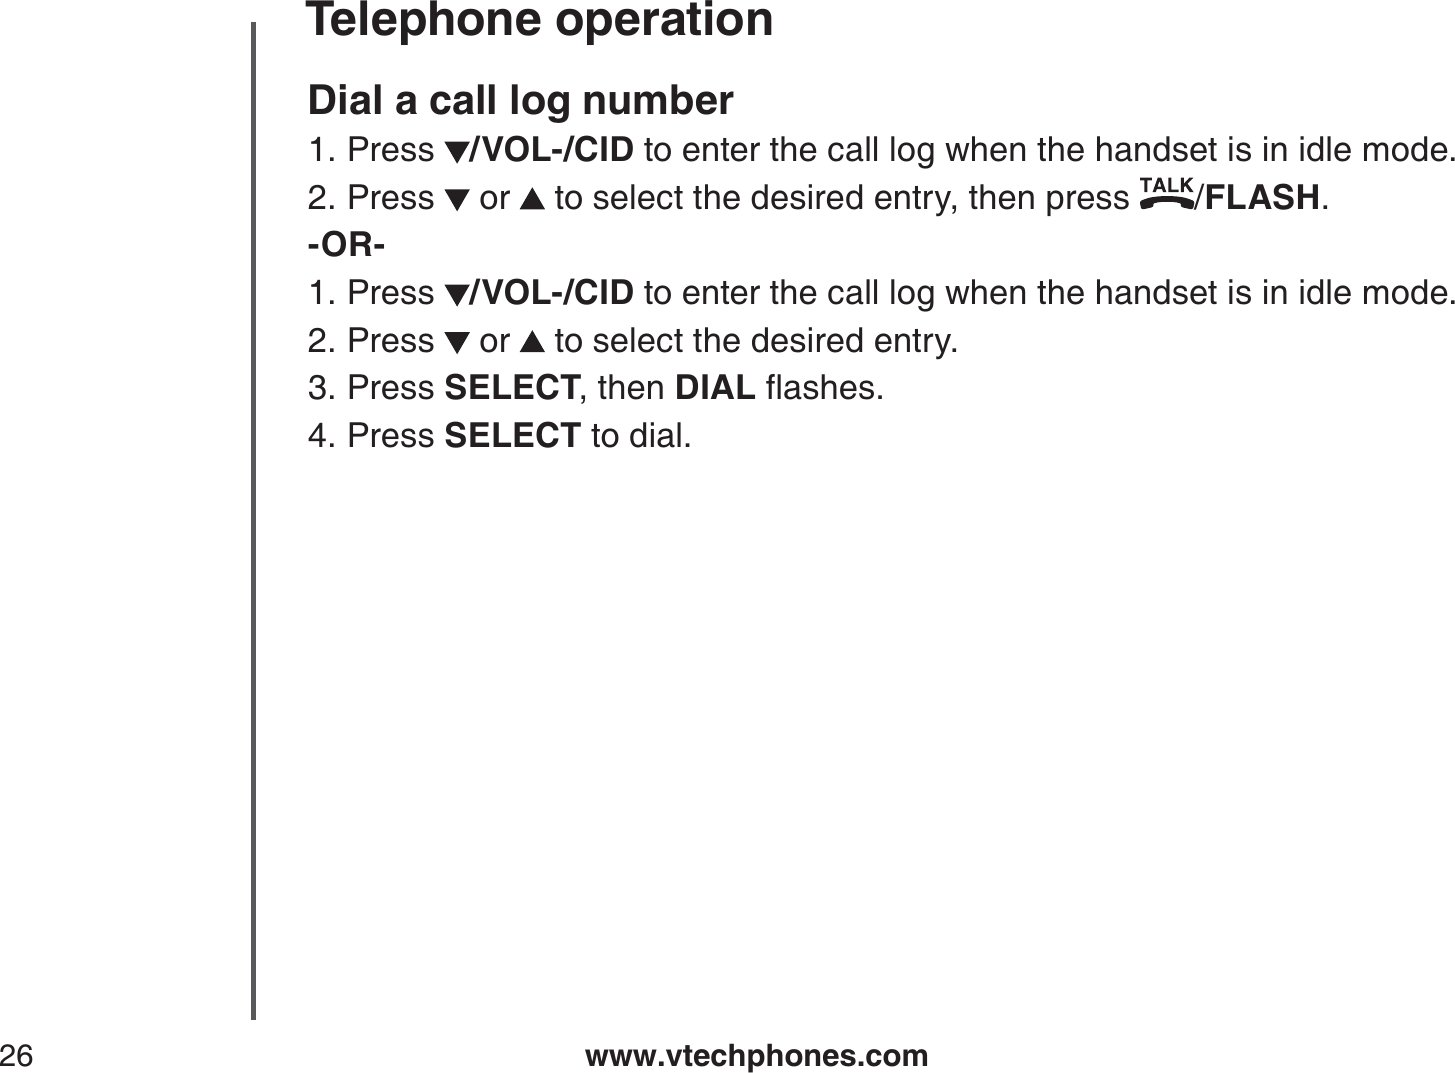 www.vtechphones.com26Telephone operationDial a call log numberPress  /VOL-/CID to enter the call log when the handset is in idle mode. Press   or   to select the desired entry, then press  /FLASH.-OR-Press  /VOL-/CID to enter the call log when the handset is in idle mode. Press   or   to select the desired entry.Press SELECT, then DIALƀCUJGUPress SELECT to dial.1.2.1.2.3.4.